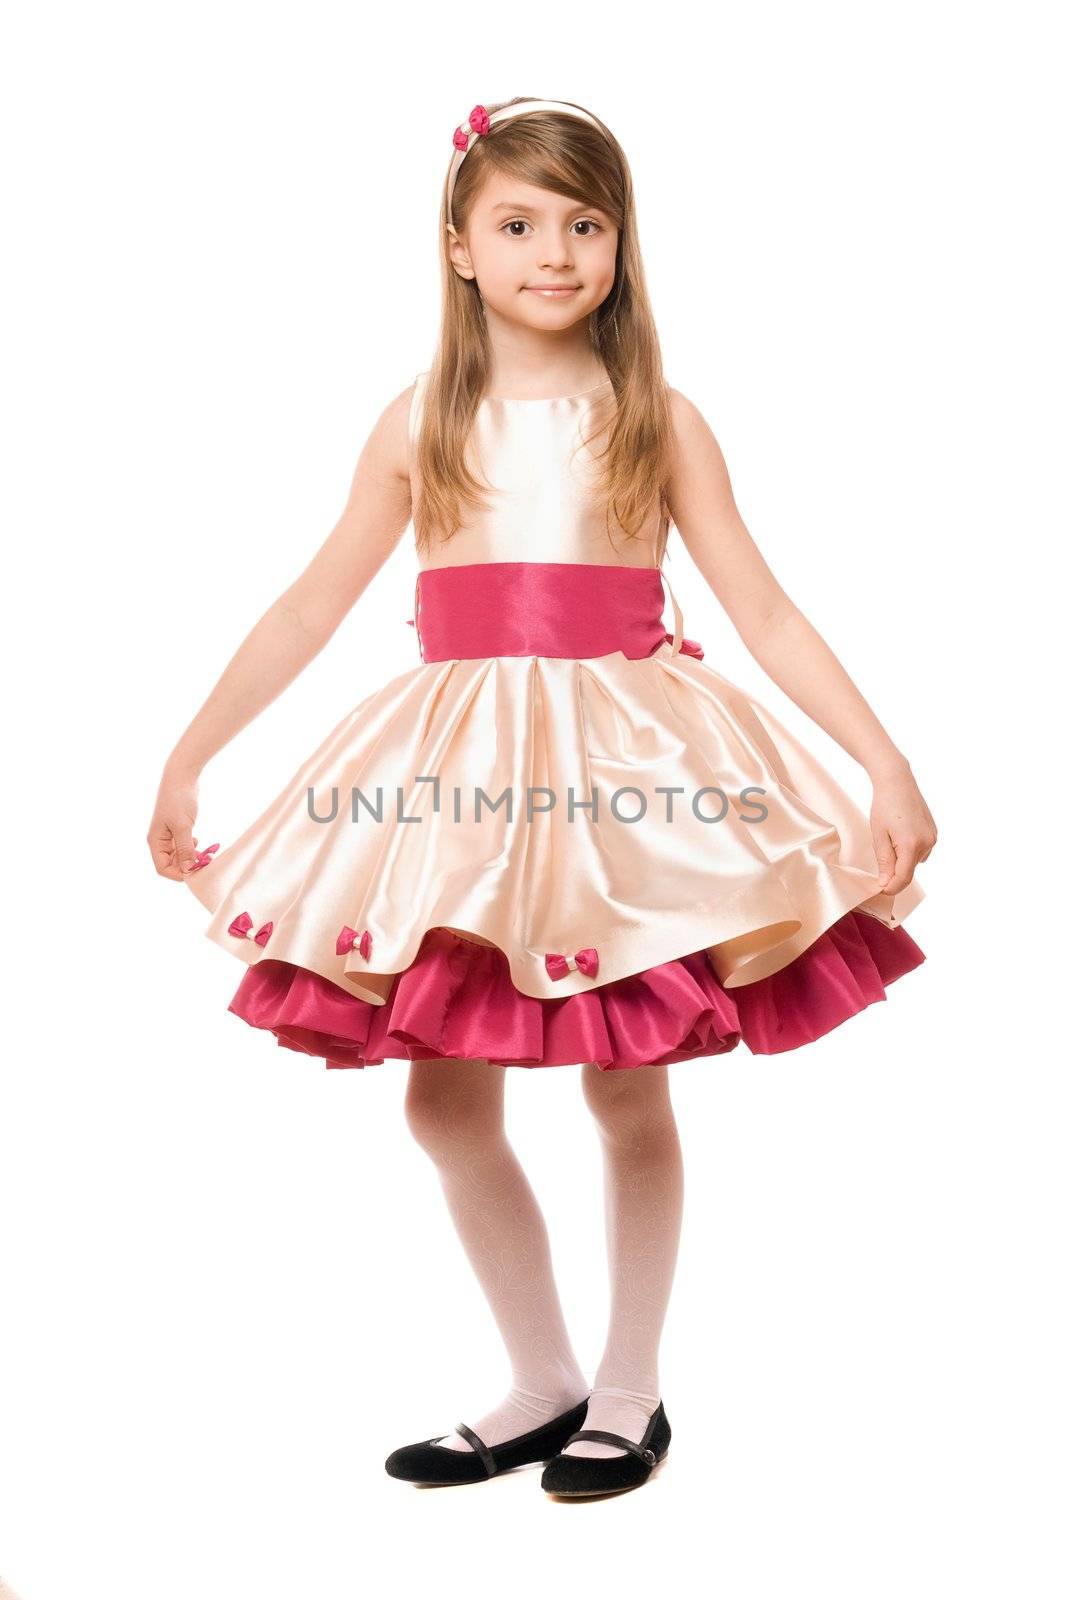 Attractive little lady in a dress. Isolated